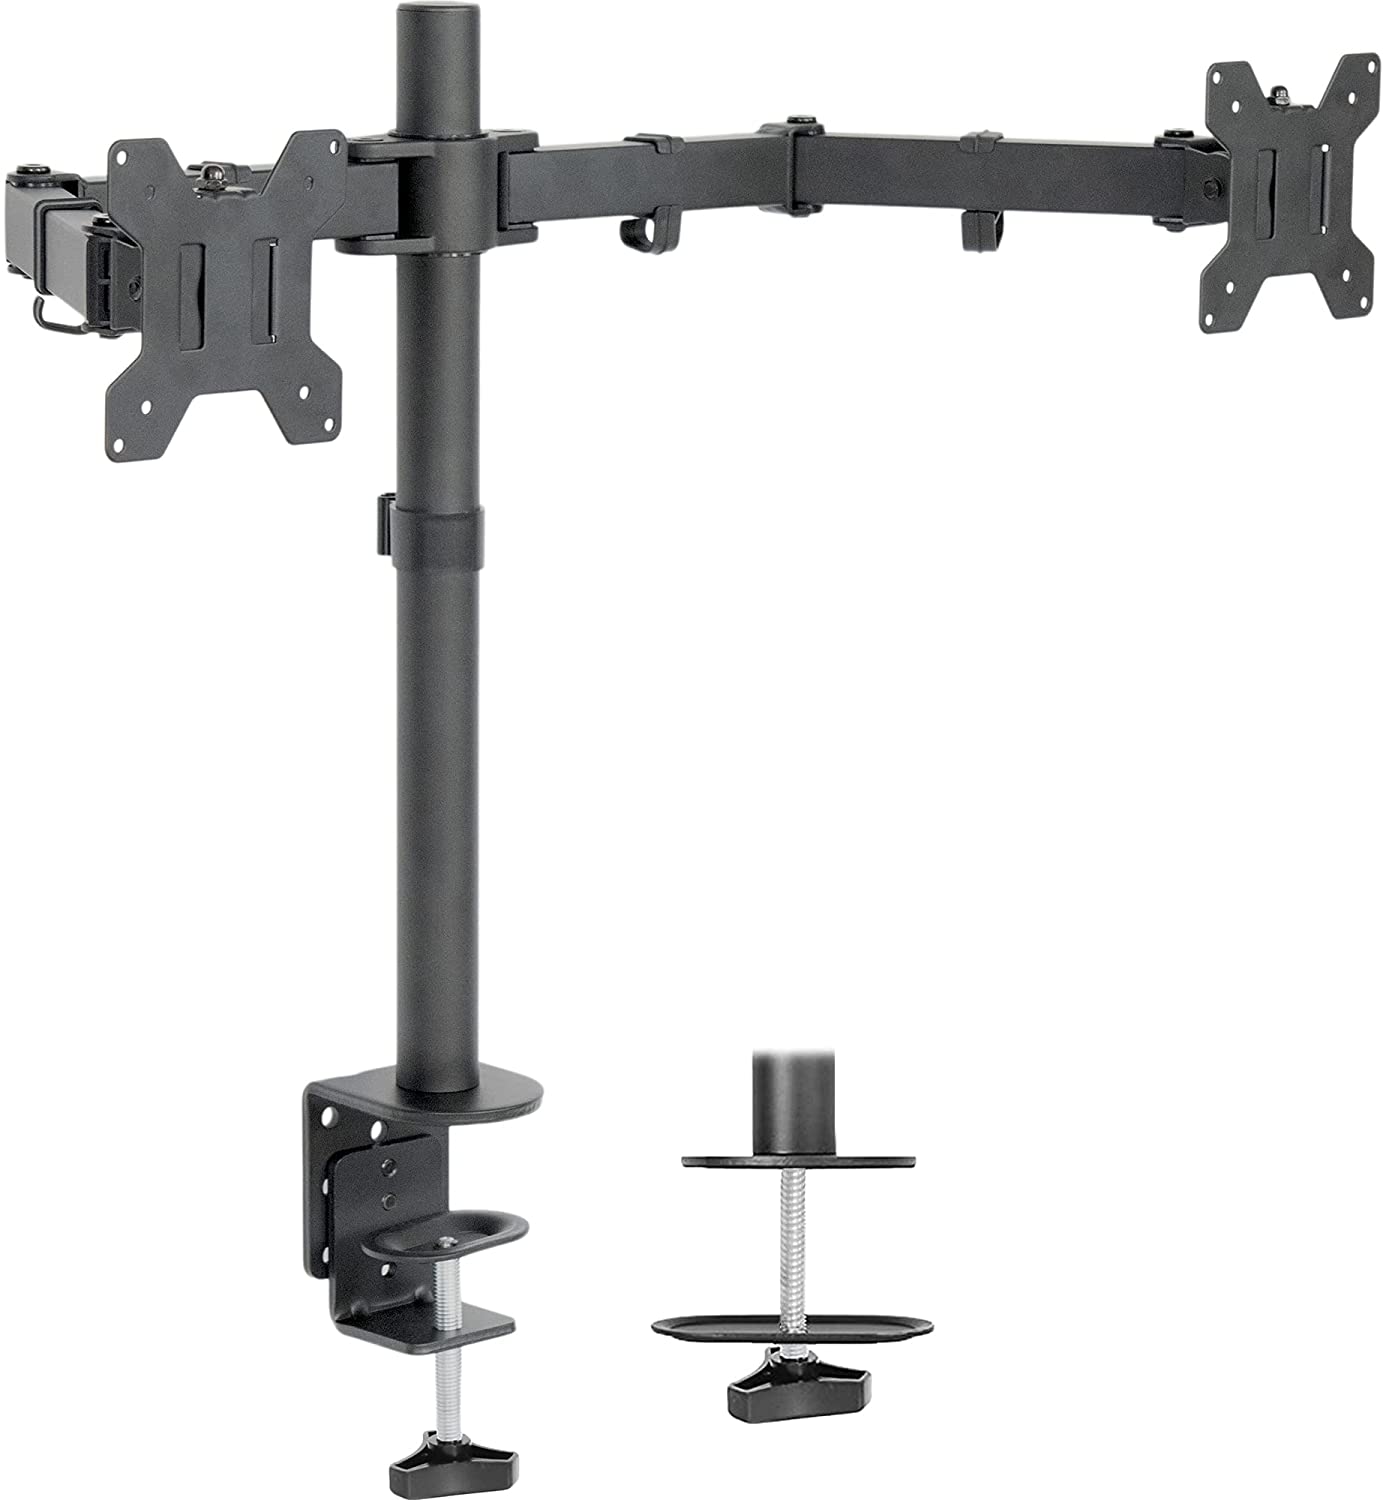 VIVO Dual LCD LED 13 to 27 inch Monitor Desk Mount Stand